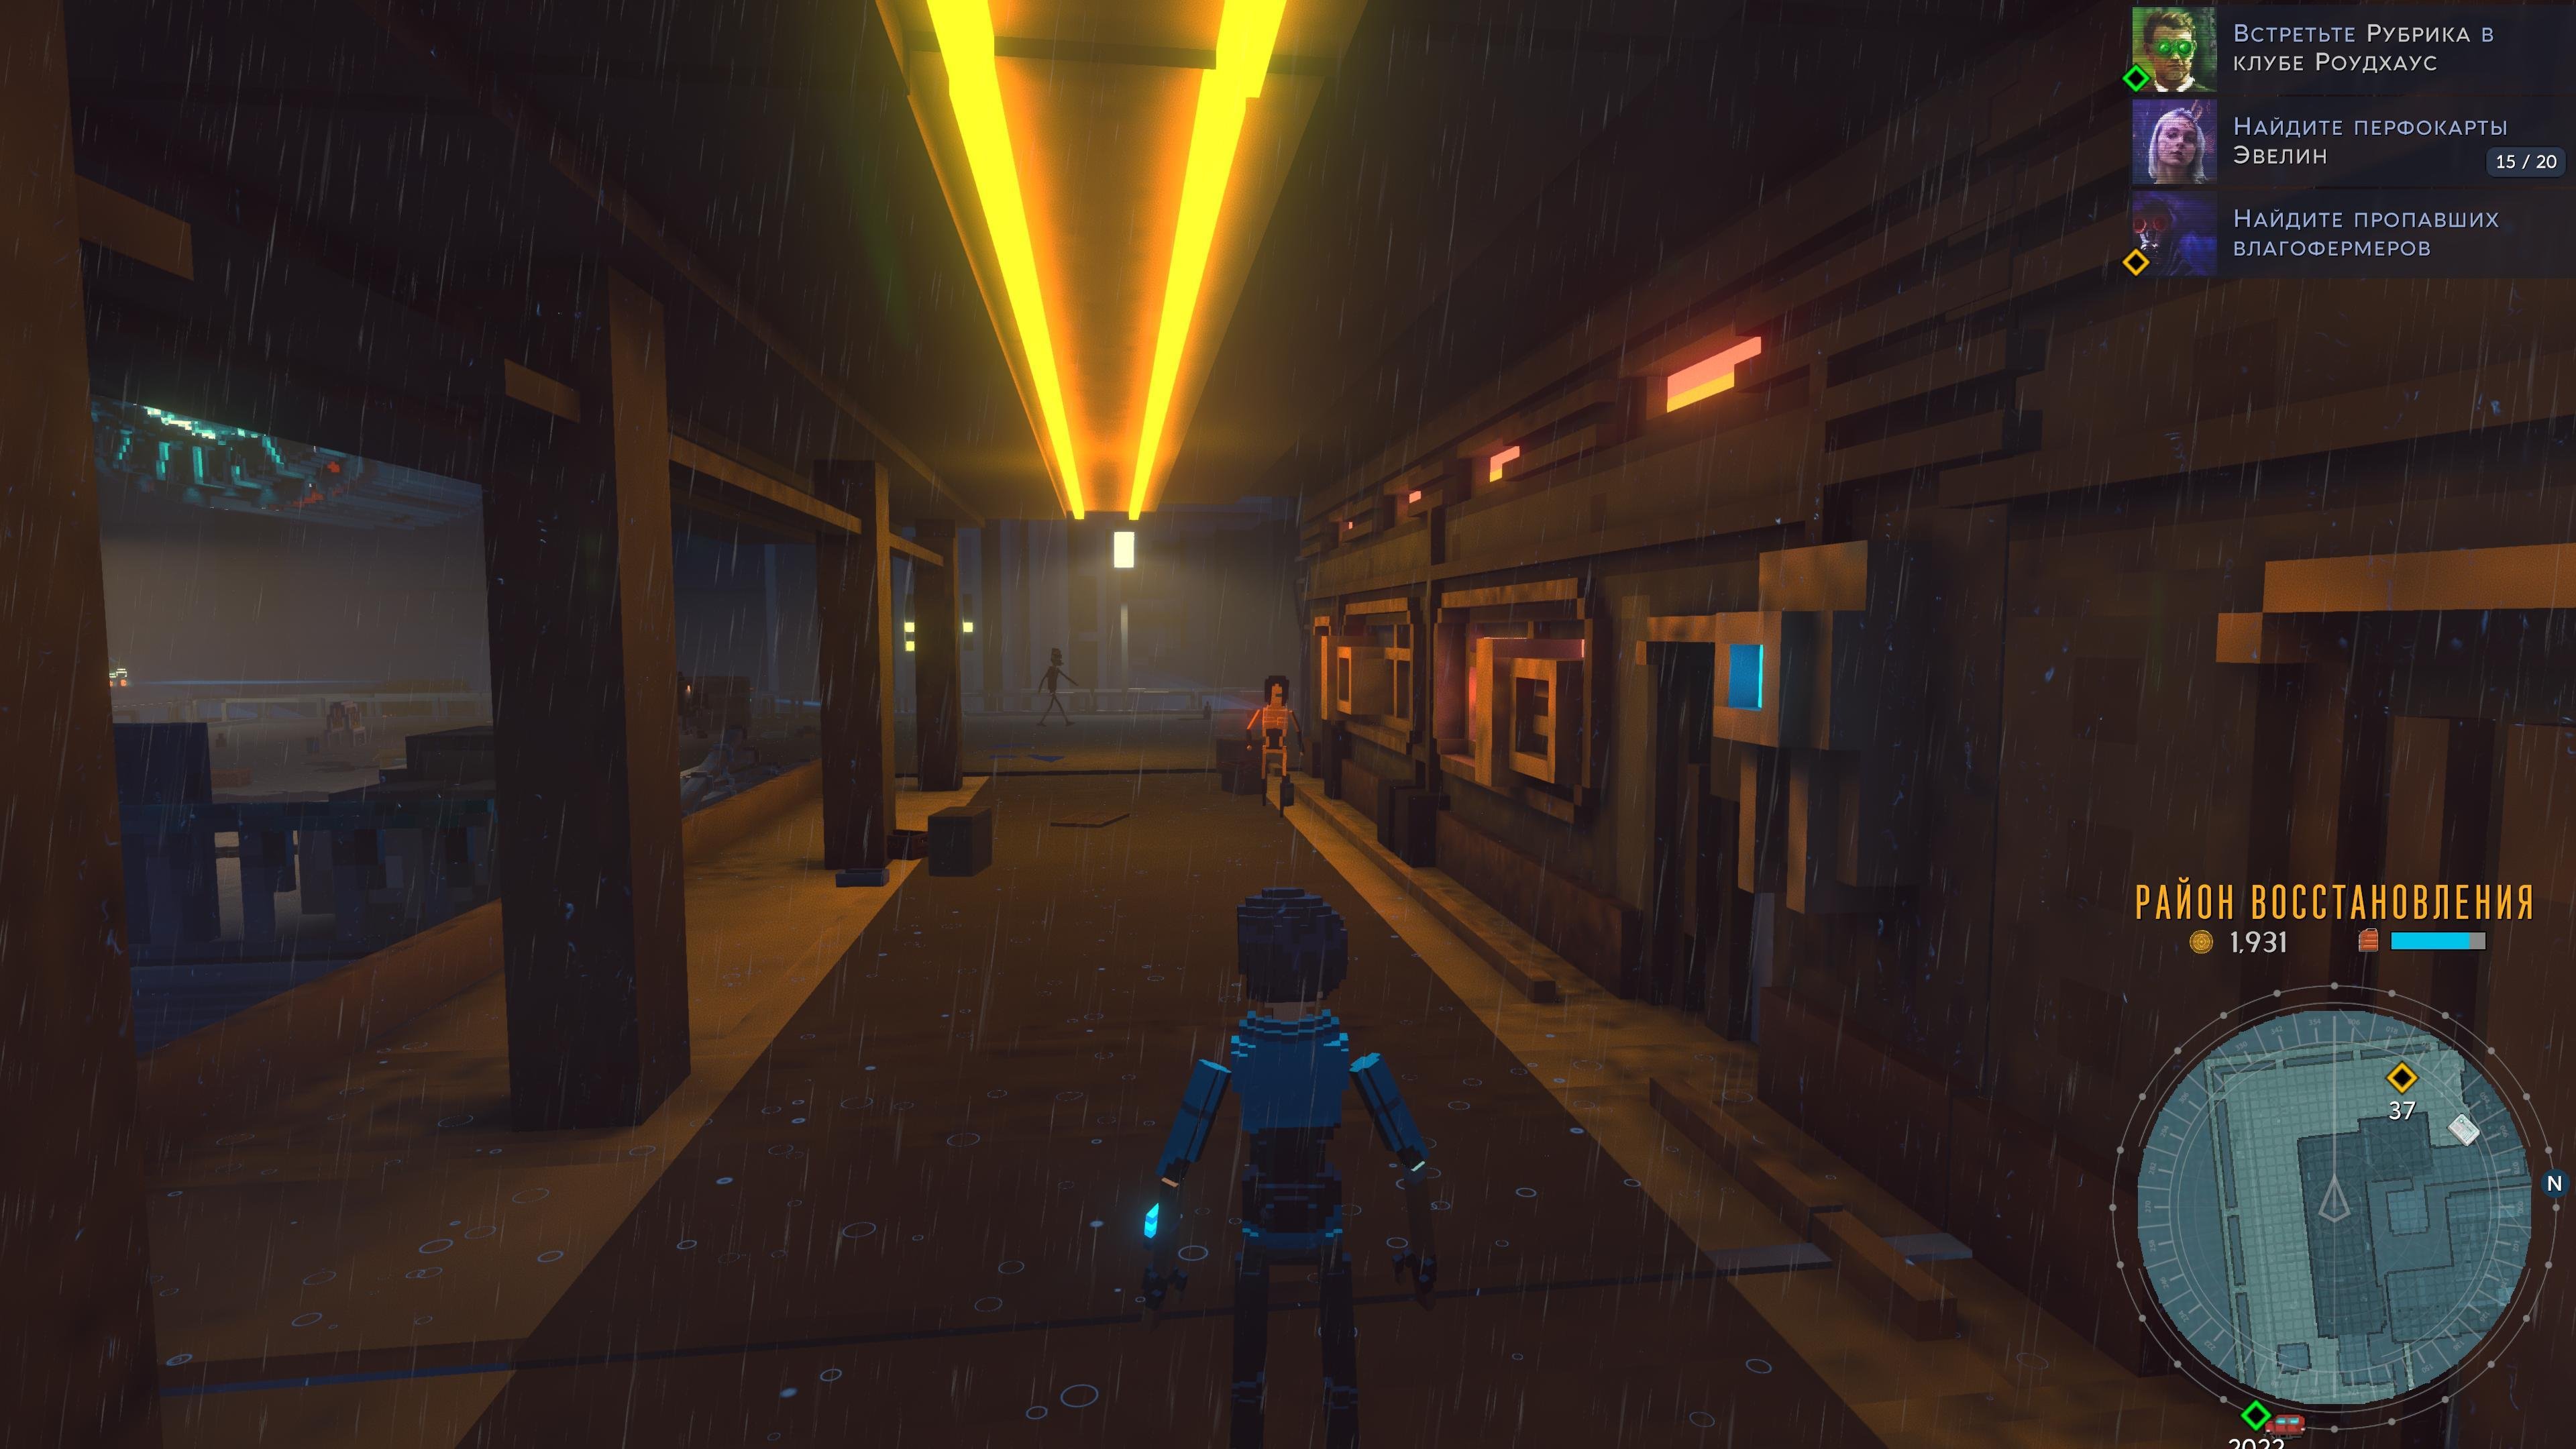 Screenshot for the game Cloudpunk [SKIDROW] (2020) download torrent License